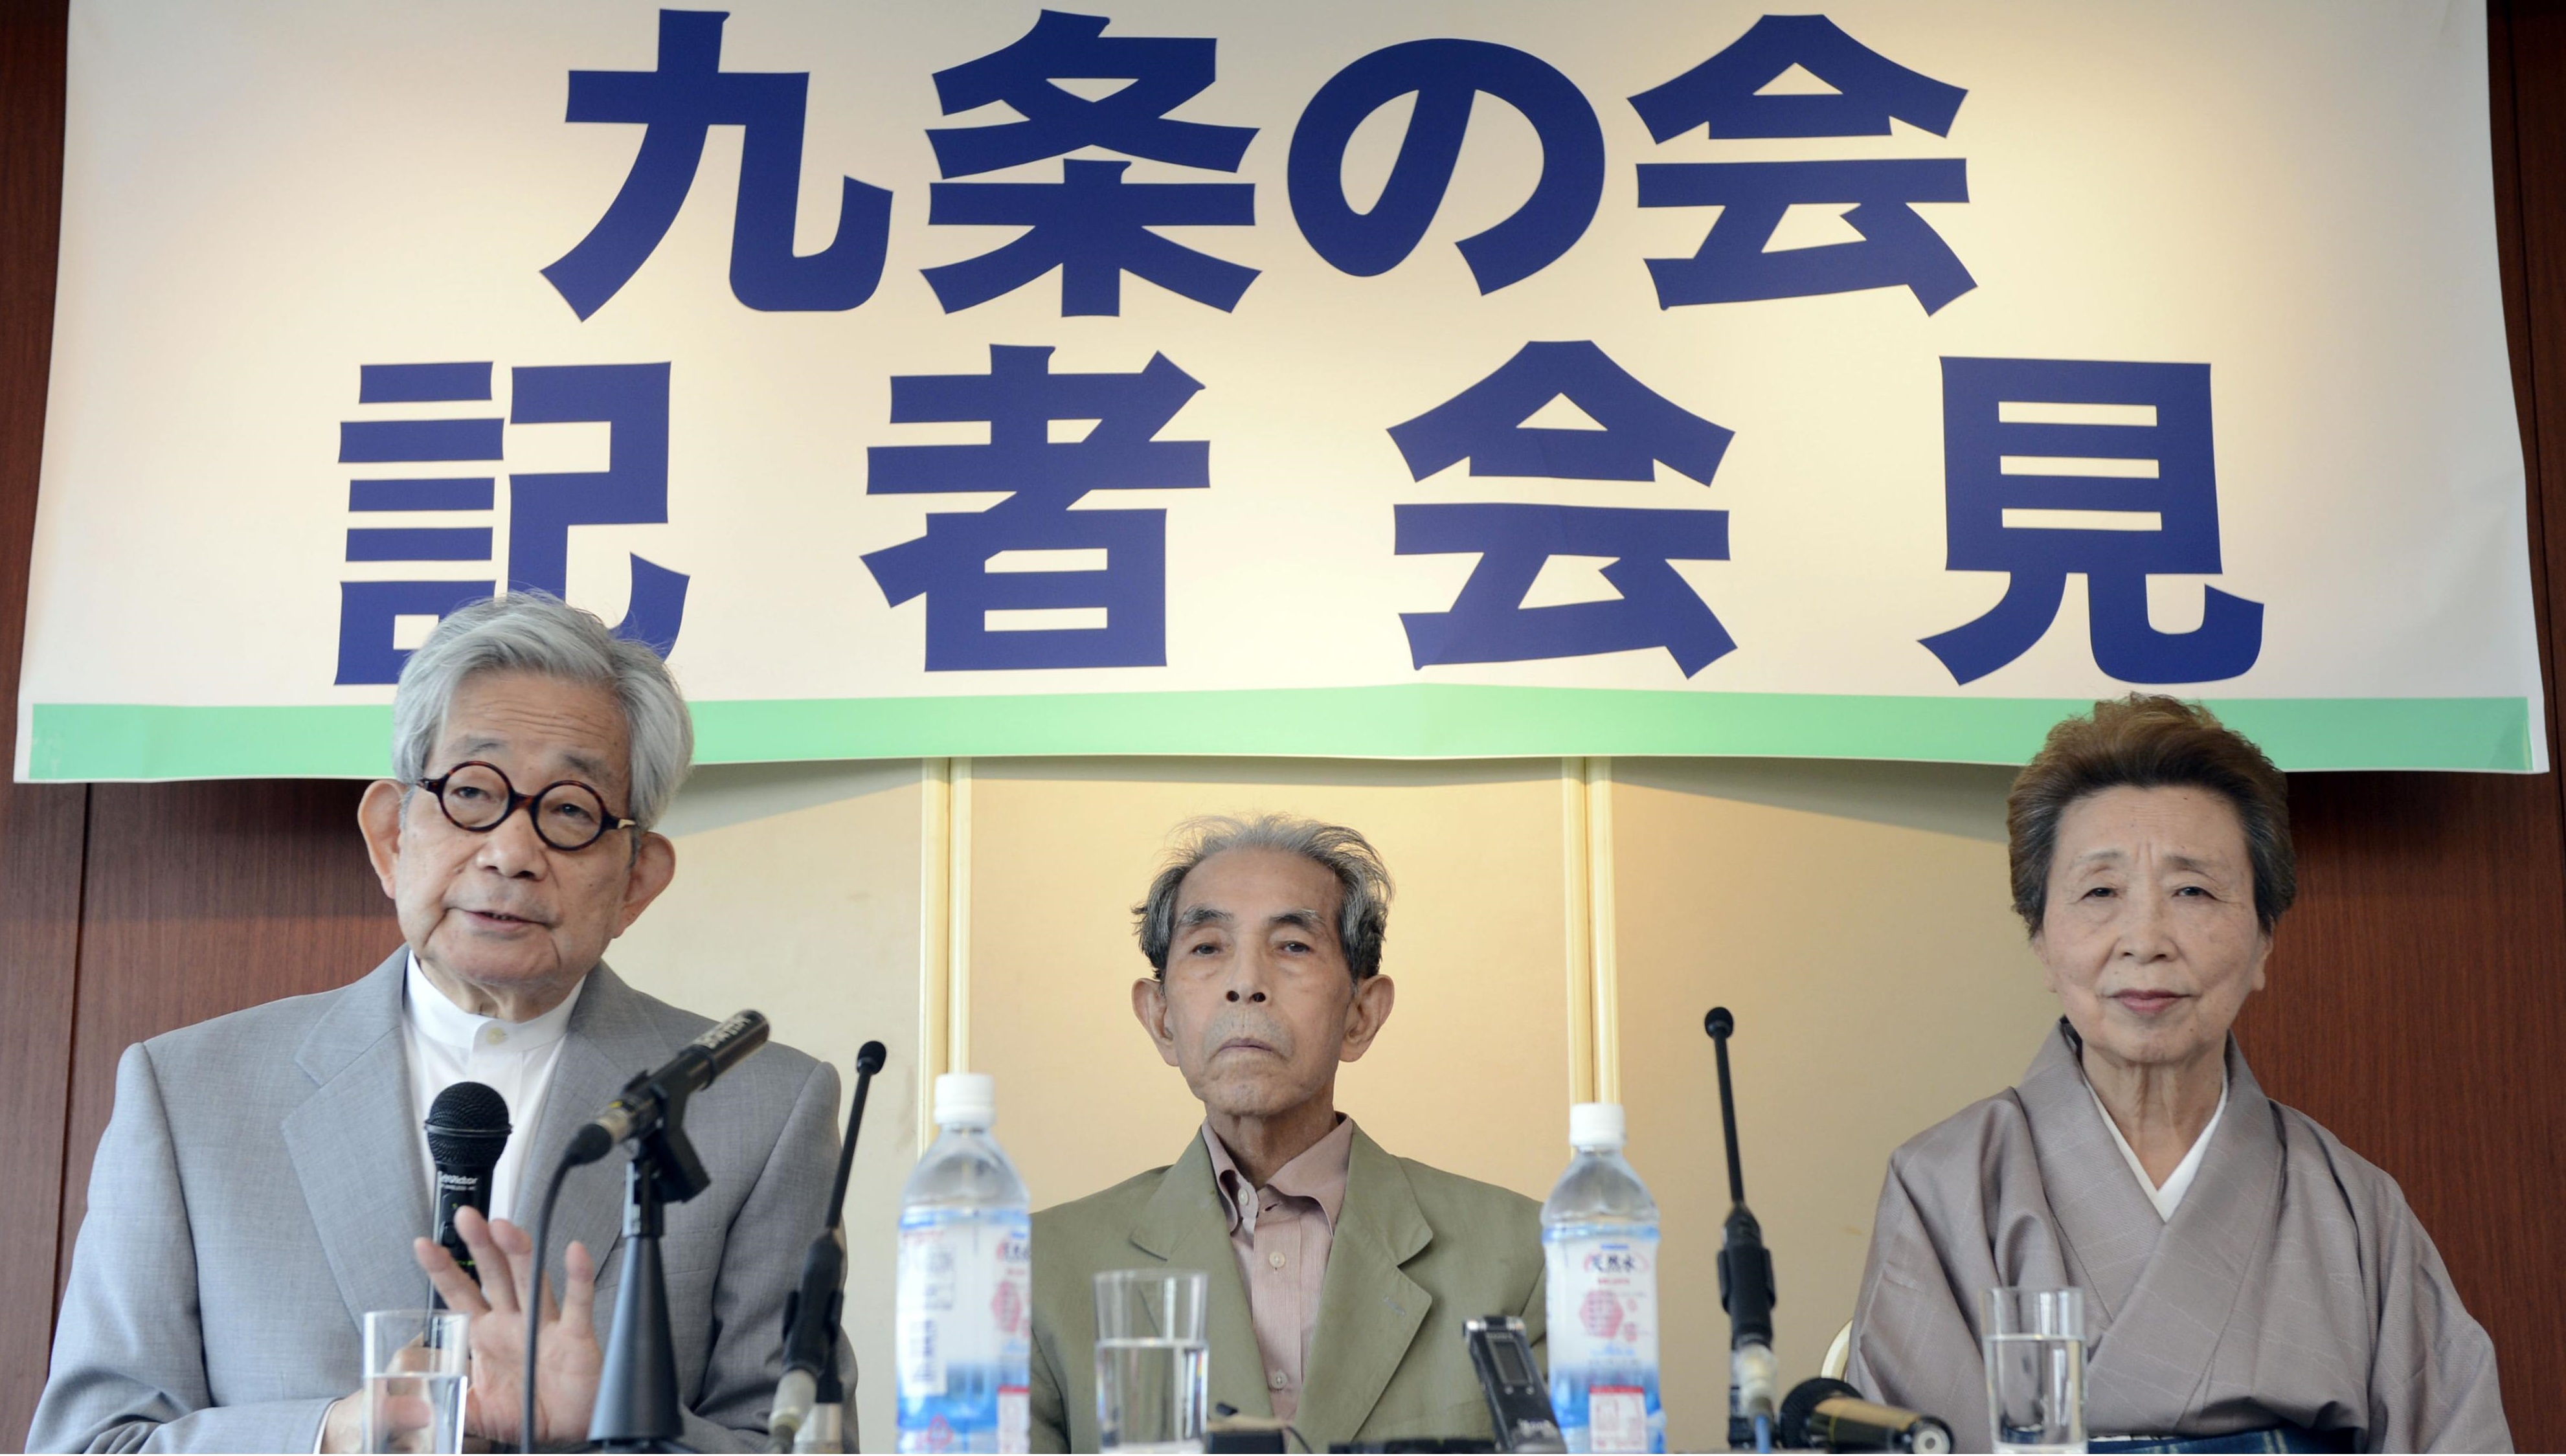 Scholar Yasuhiro Okudaira (center), flanked by Nobel literature laureate Kenzaburo Oe and writer Hisae Sawachi, faces the media during a news conference in May 2013. He was one of the key members of the Article 9 Association, a group that is dedicated to defending war-renouncing Article 9 of the Constitution. | KYODO